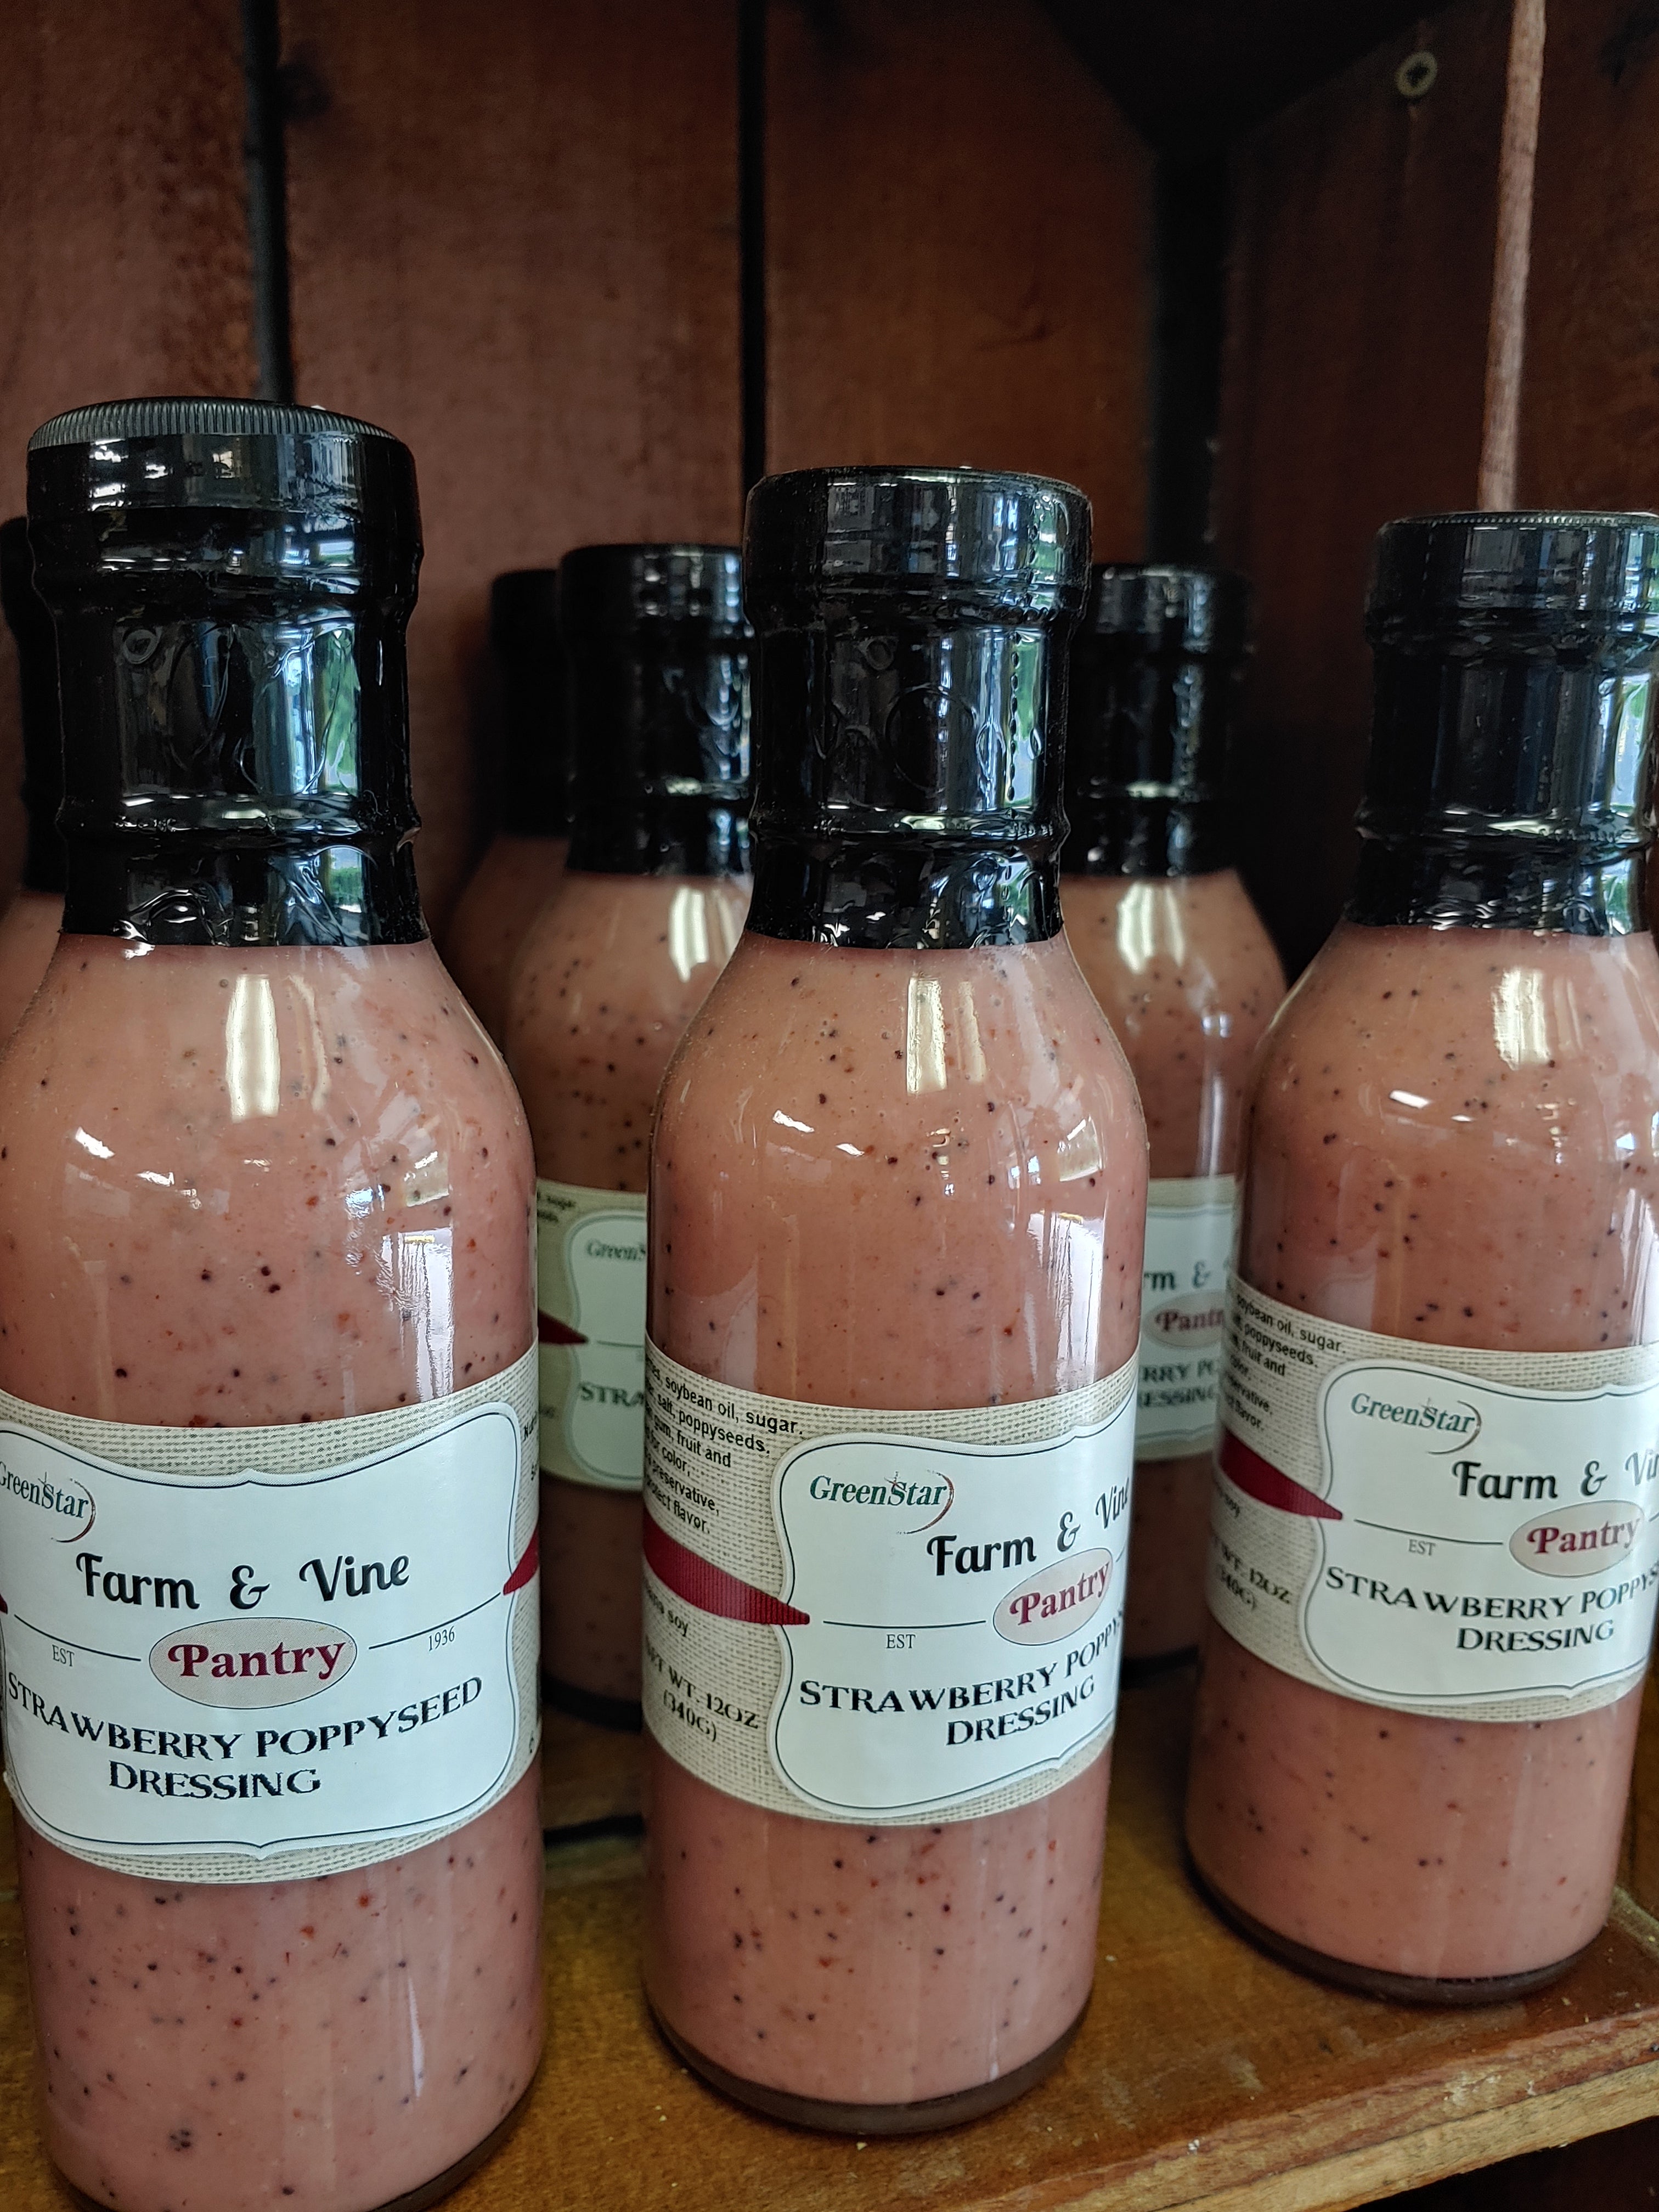 Strawberry Poppyseed Salad Dressing for 5/25 only